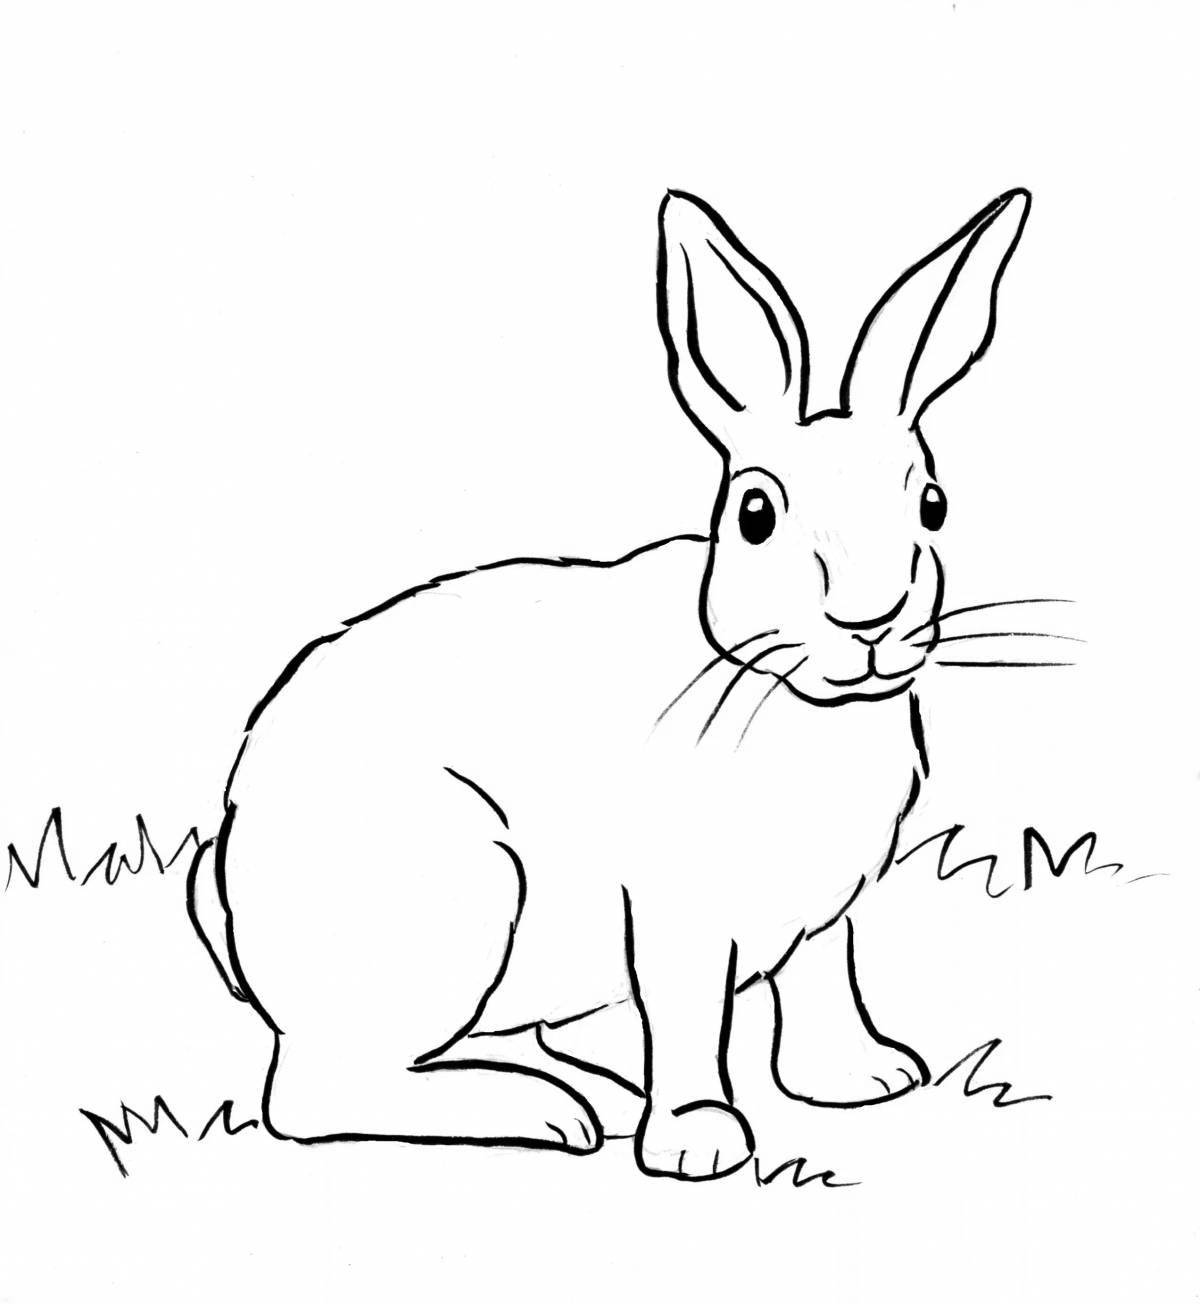 Fun hare coloring book for kids